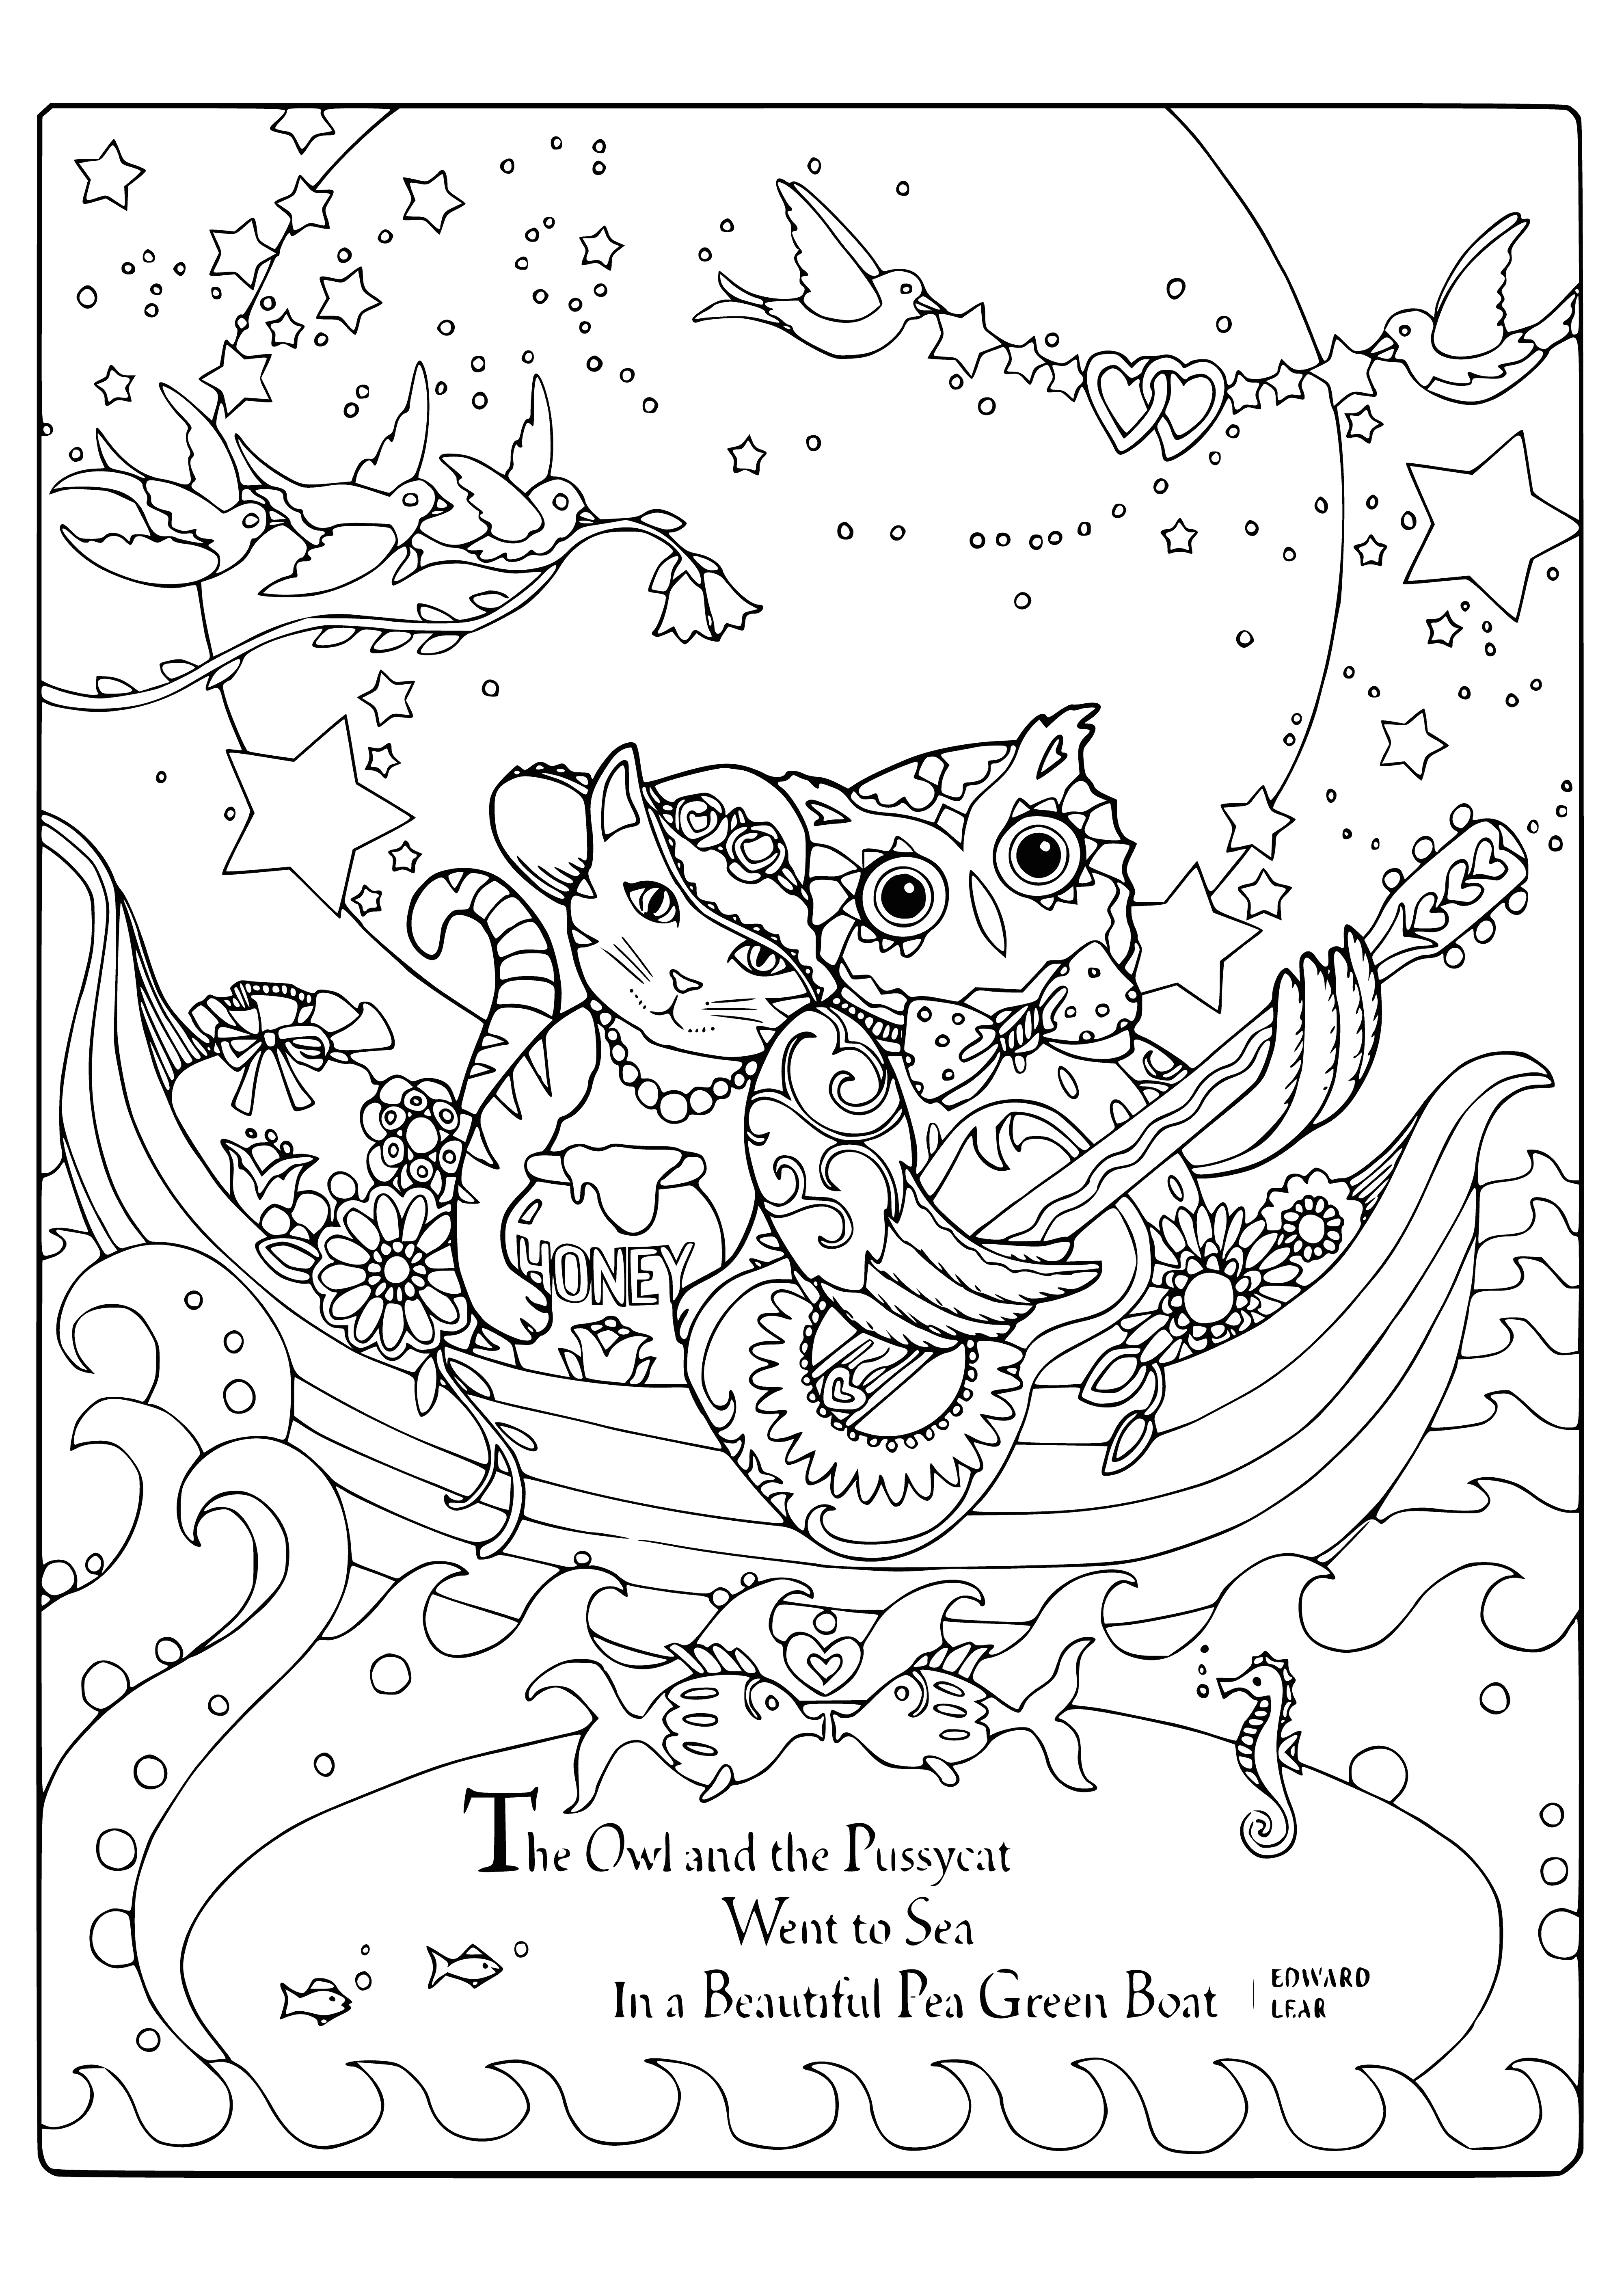 coloring page: Two owls paddle a calm lake, tree-lined hills in the distance. One owl paddles with a stick, the other hangs on tight.